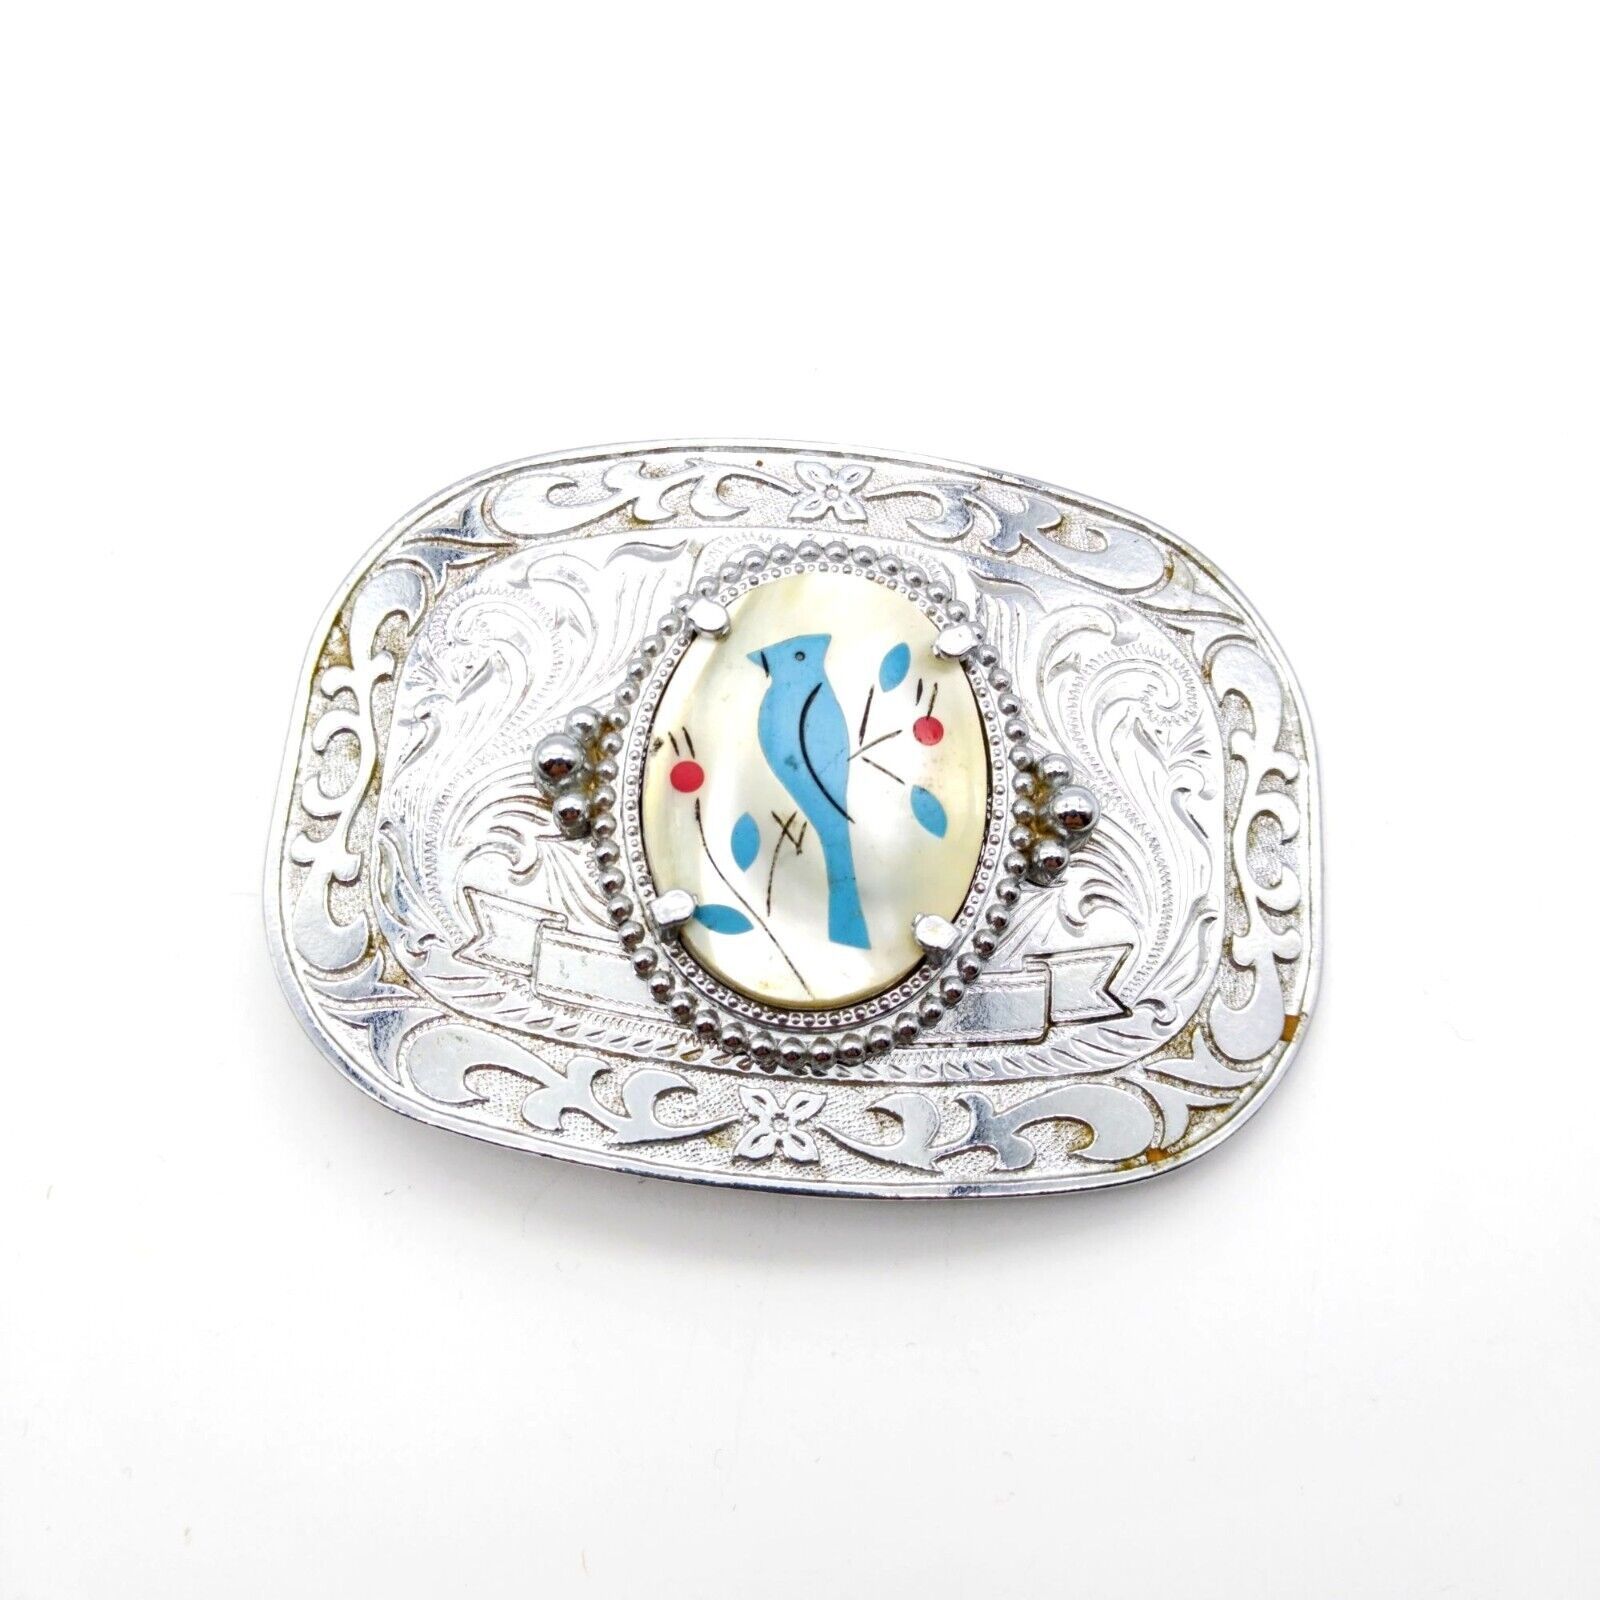 Primary image for Vintage Western Belt Buckle, Artisan Mother of Pearl Blue Bird on Berry Branch